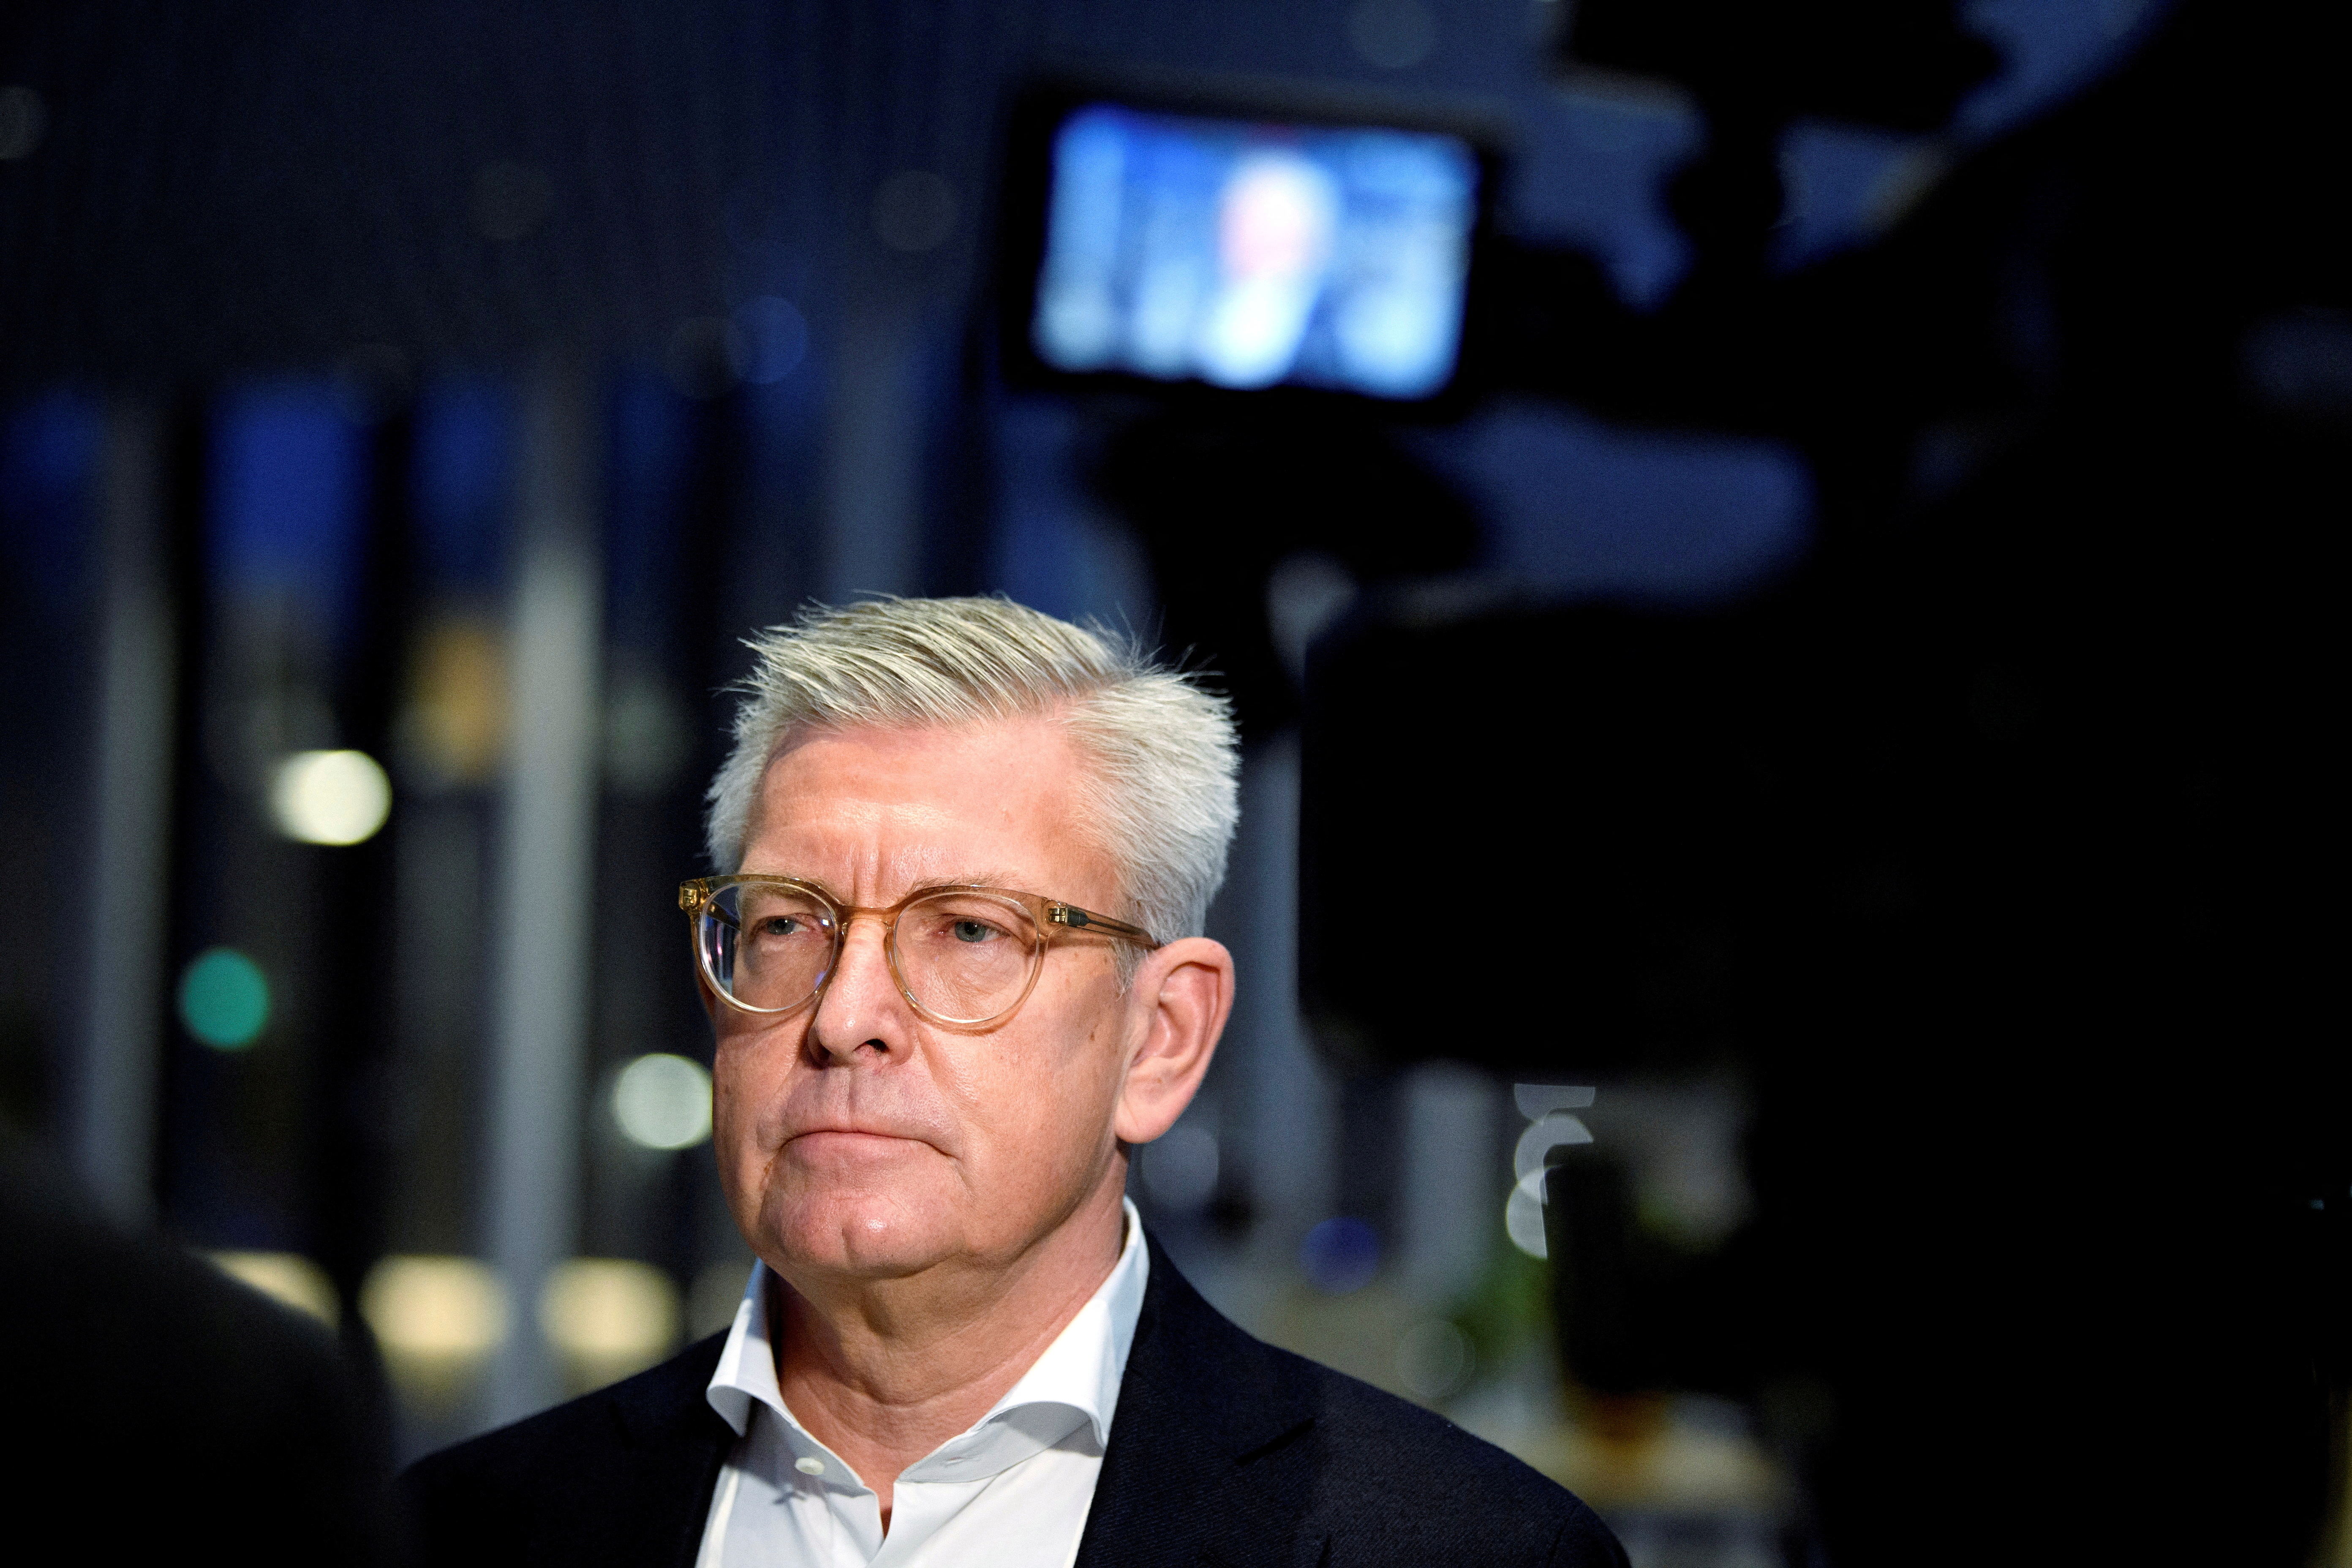 Ericsson's CEO Borje Ekholm during an interview at the company headquarters in Kista, Stockholm